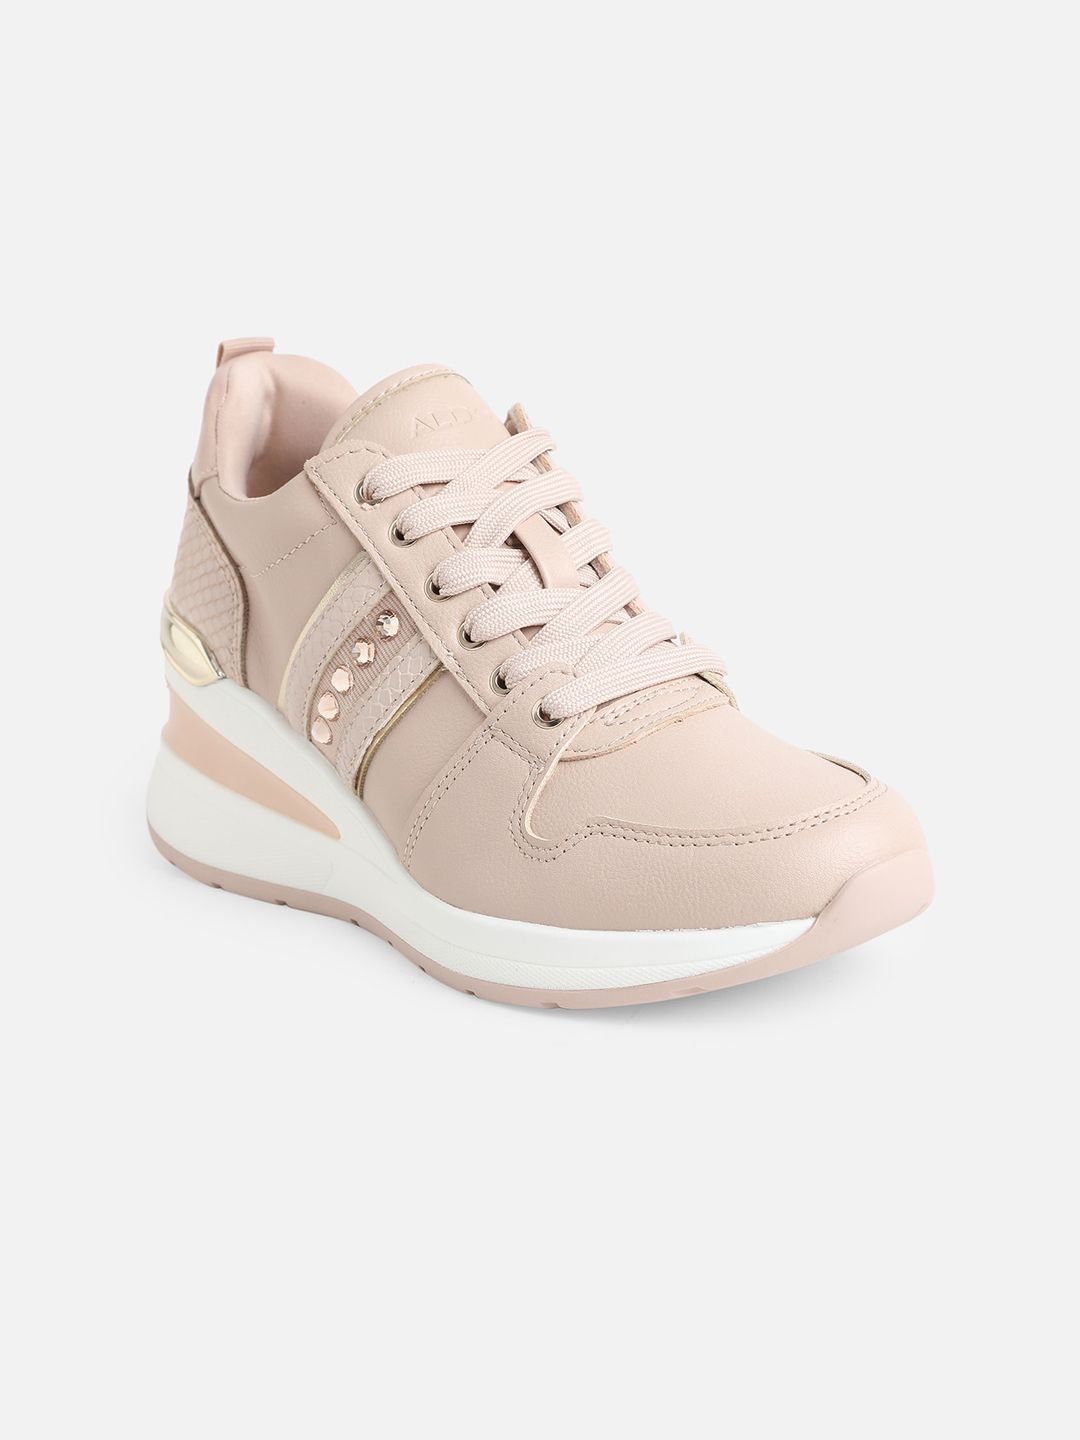 ALDO Women Pink Lace-ups Sneakers Price in India